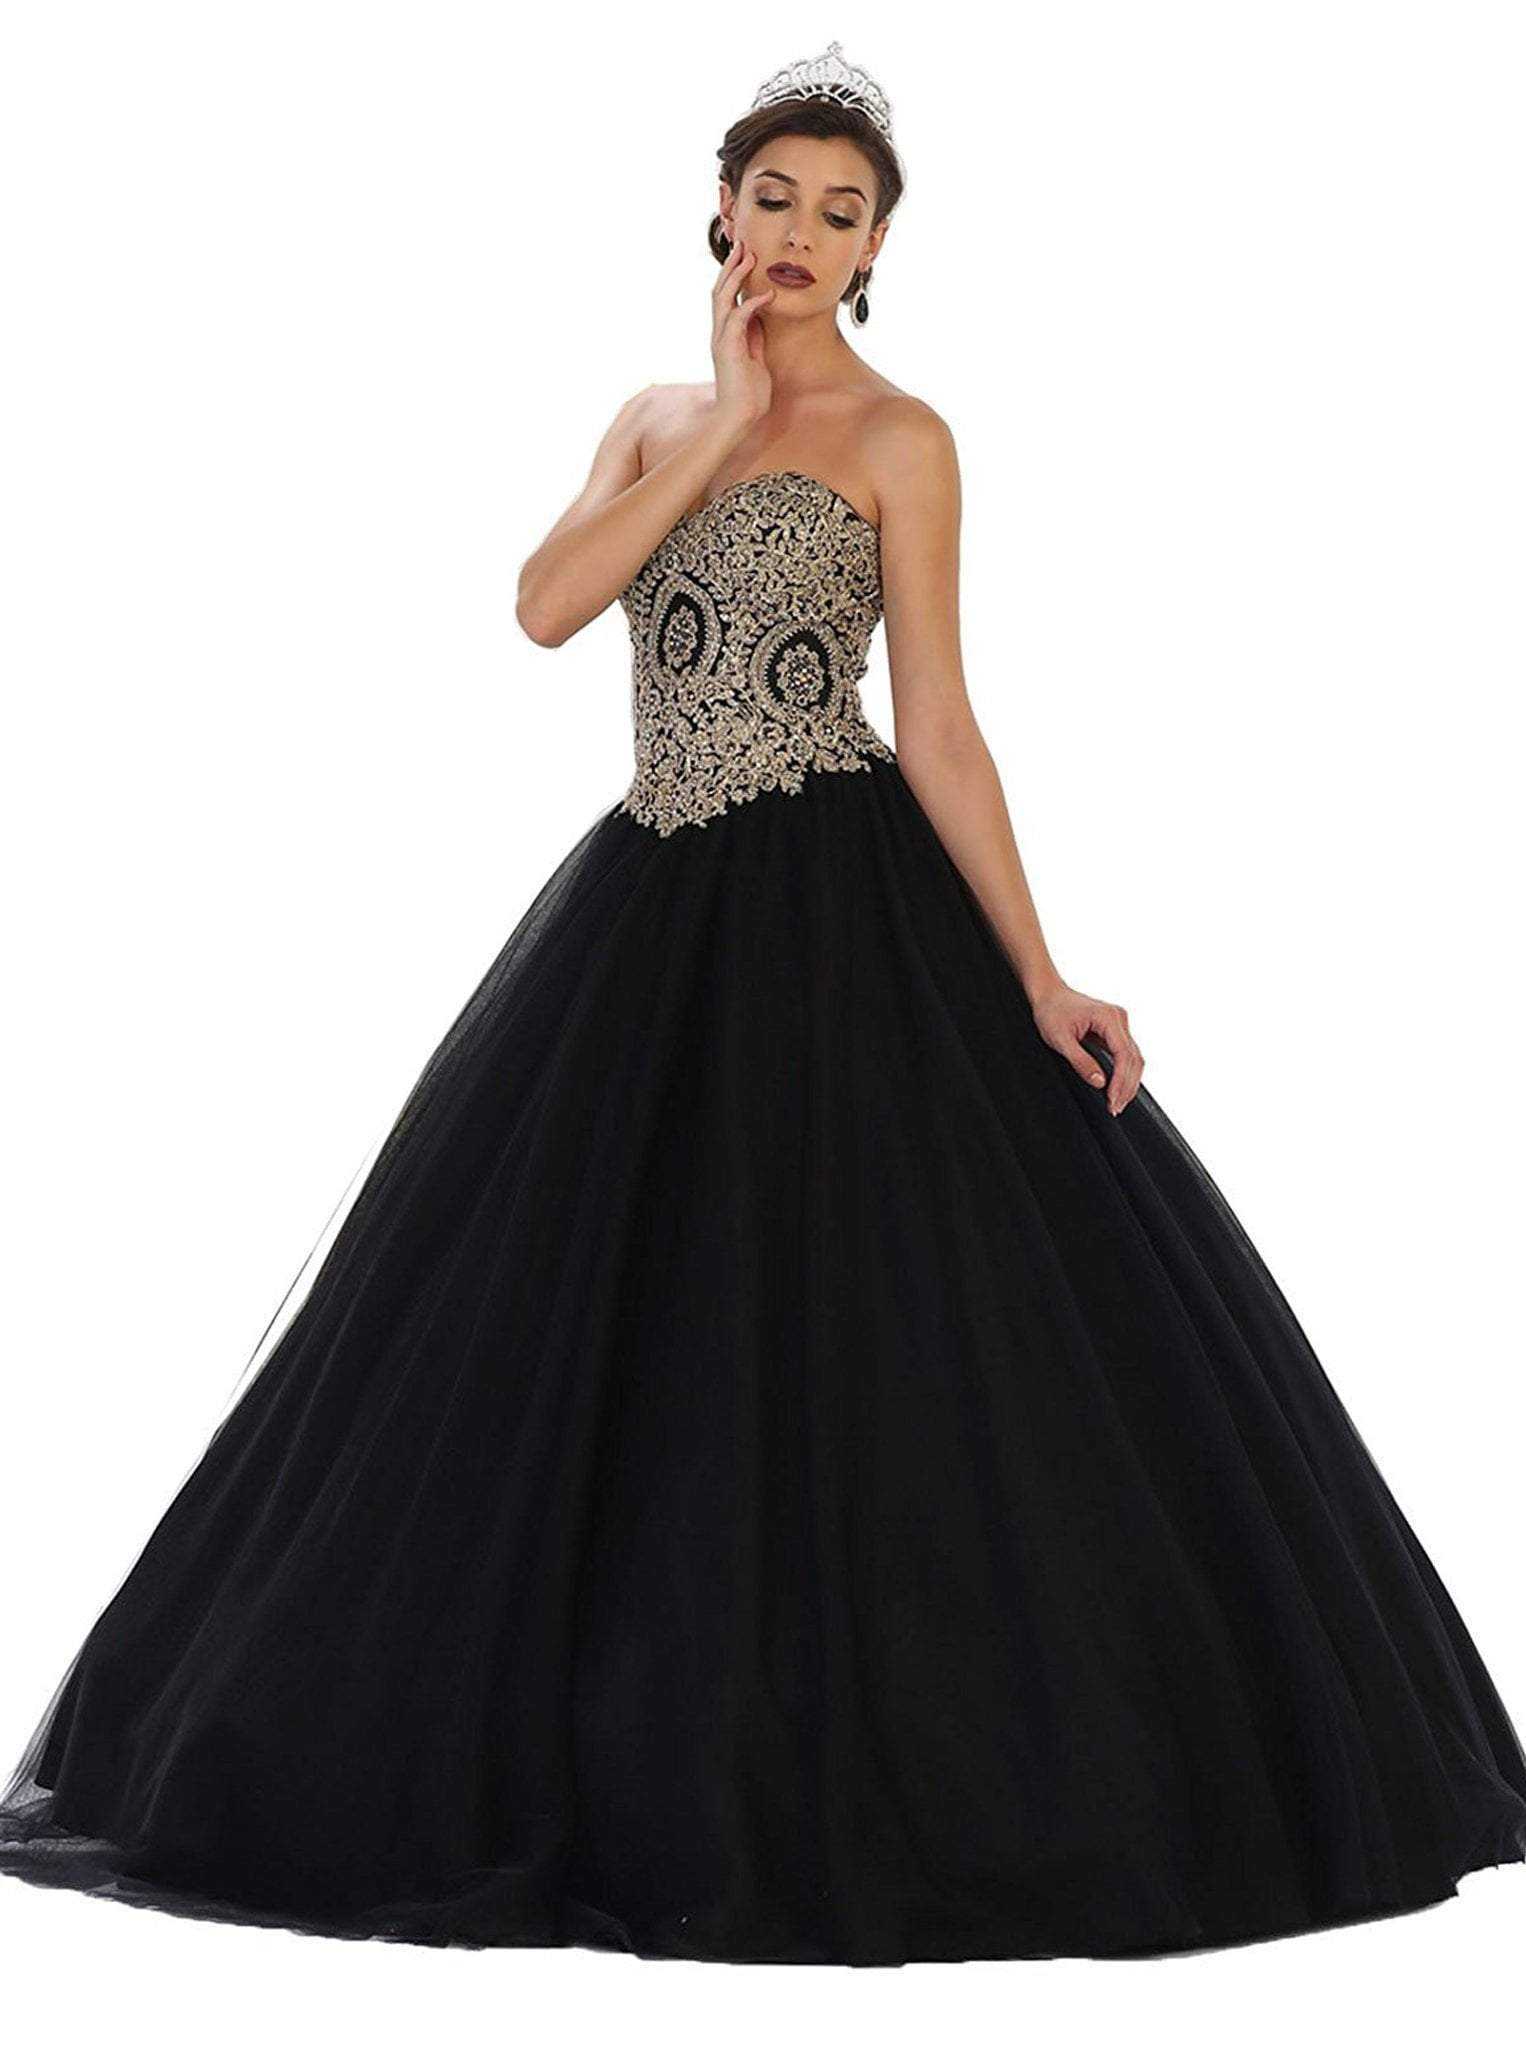 May Queen, May Queen - Strapless Sweetheart Gilded Quinceanera Ballgown LK-74